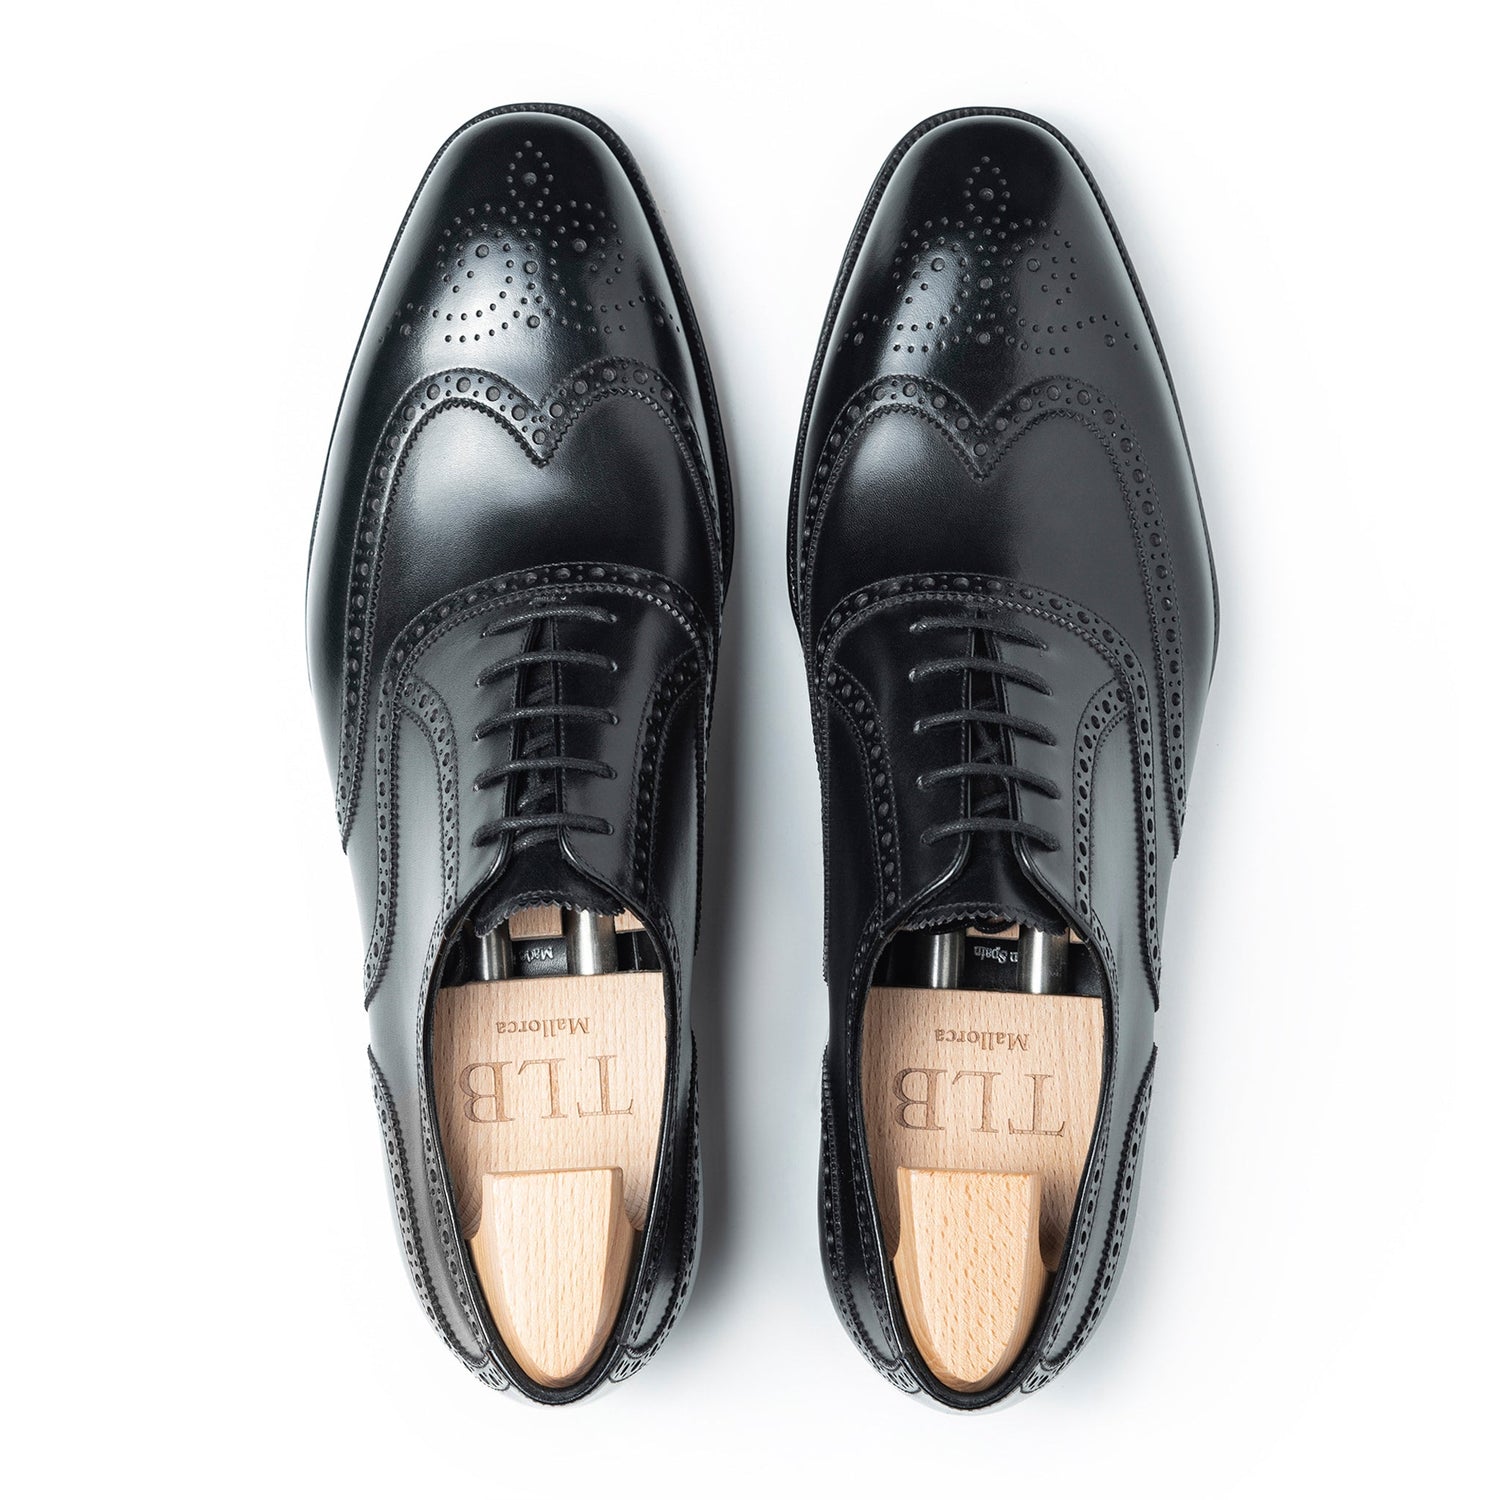 TLB Mallorca  Leather Men's Oxford shoes made in Spain